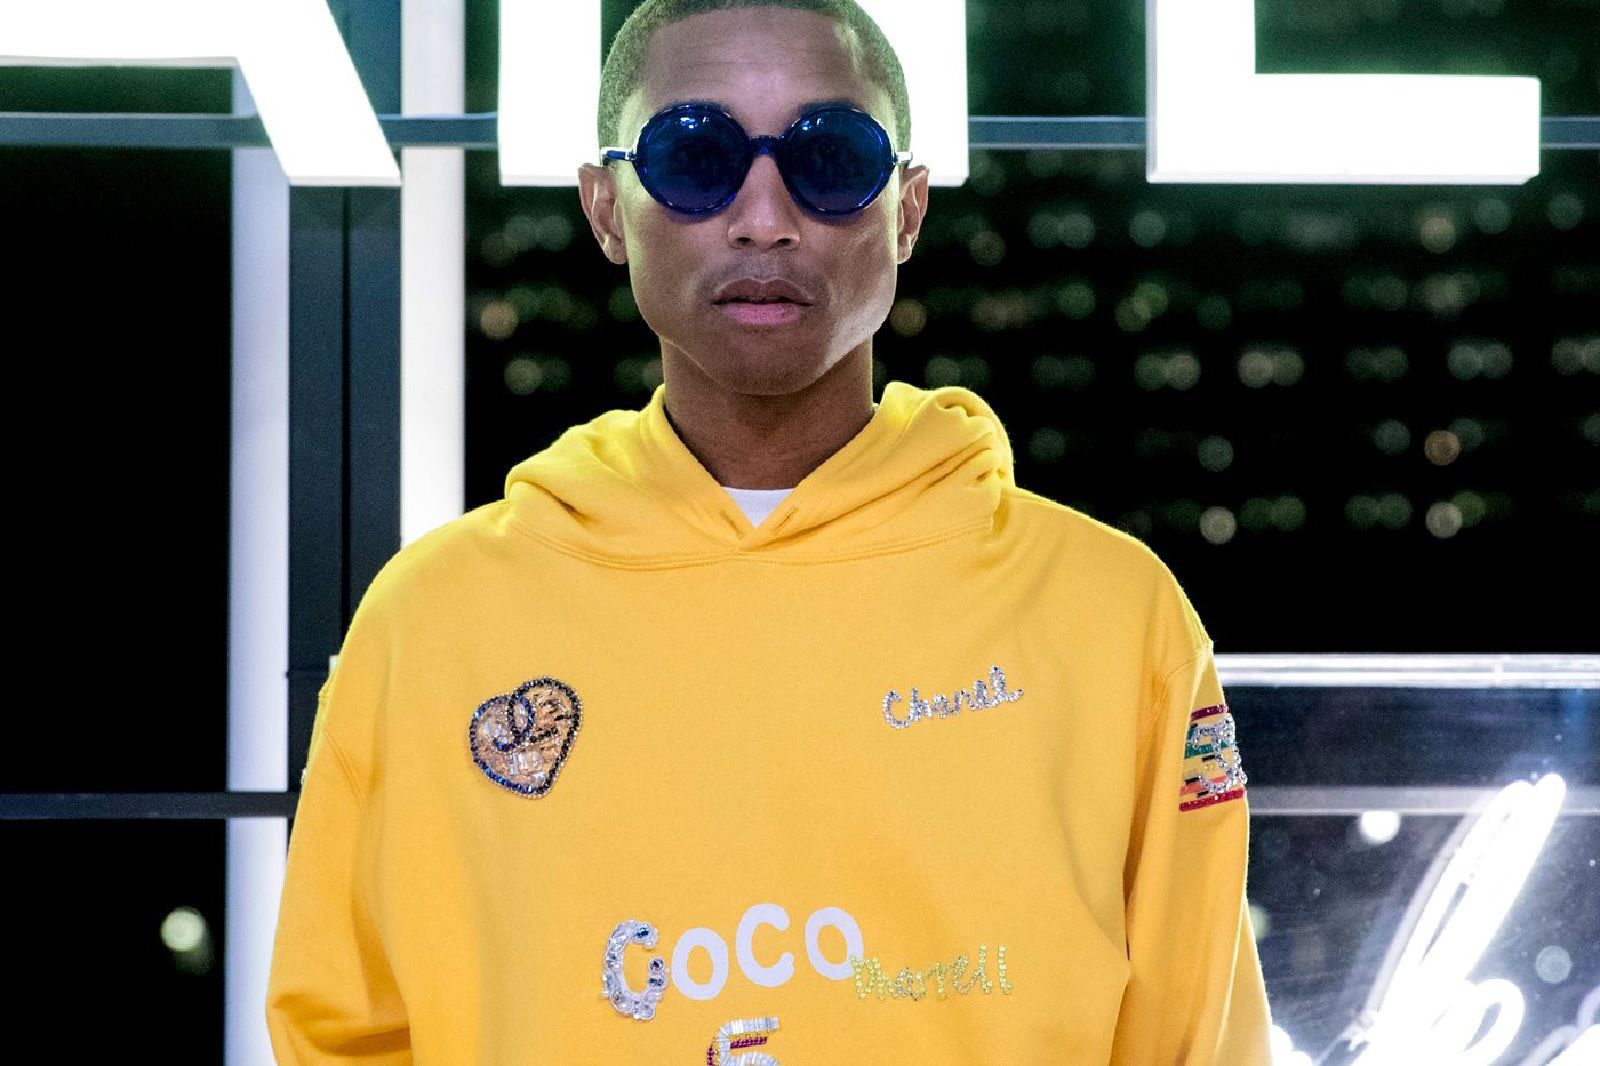 Go behind the scenes on Pharrell Williams' Chanel campaign